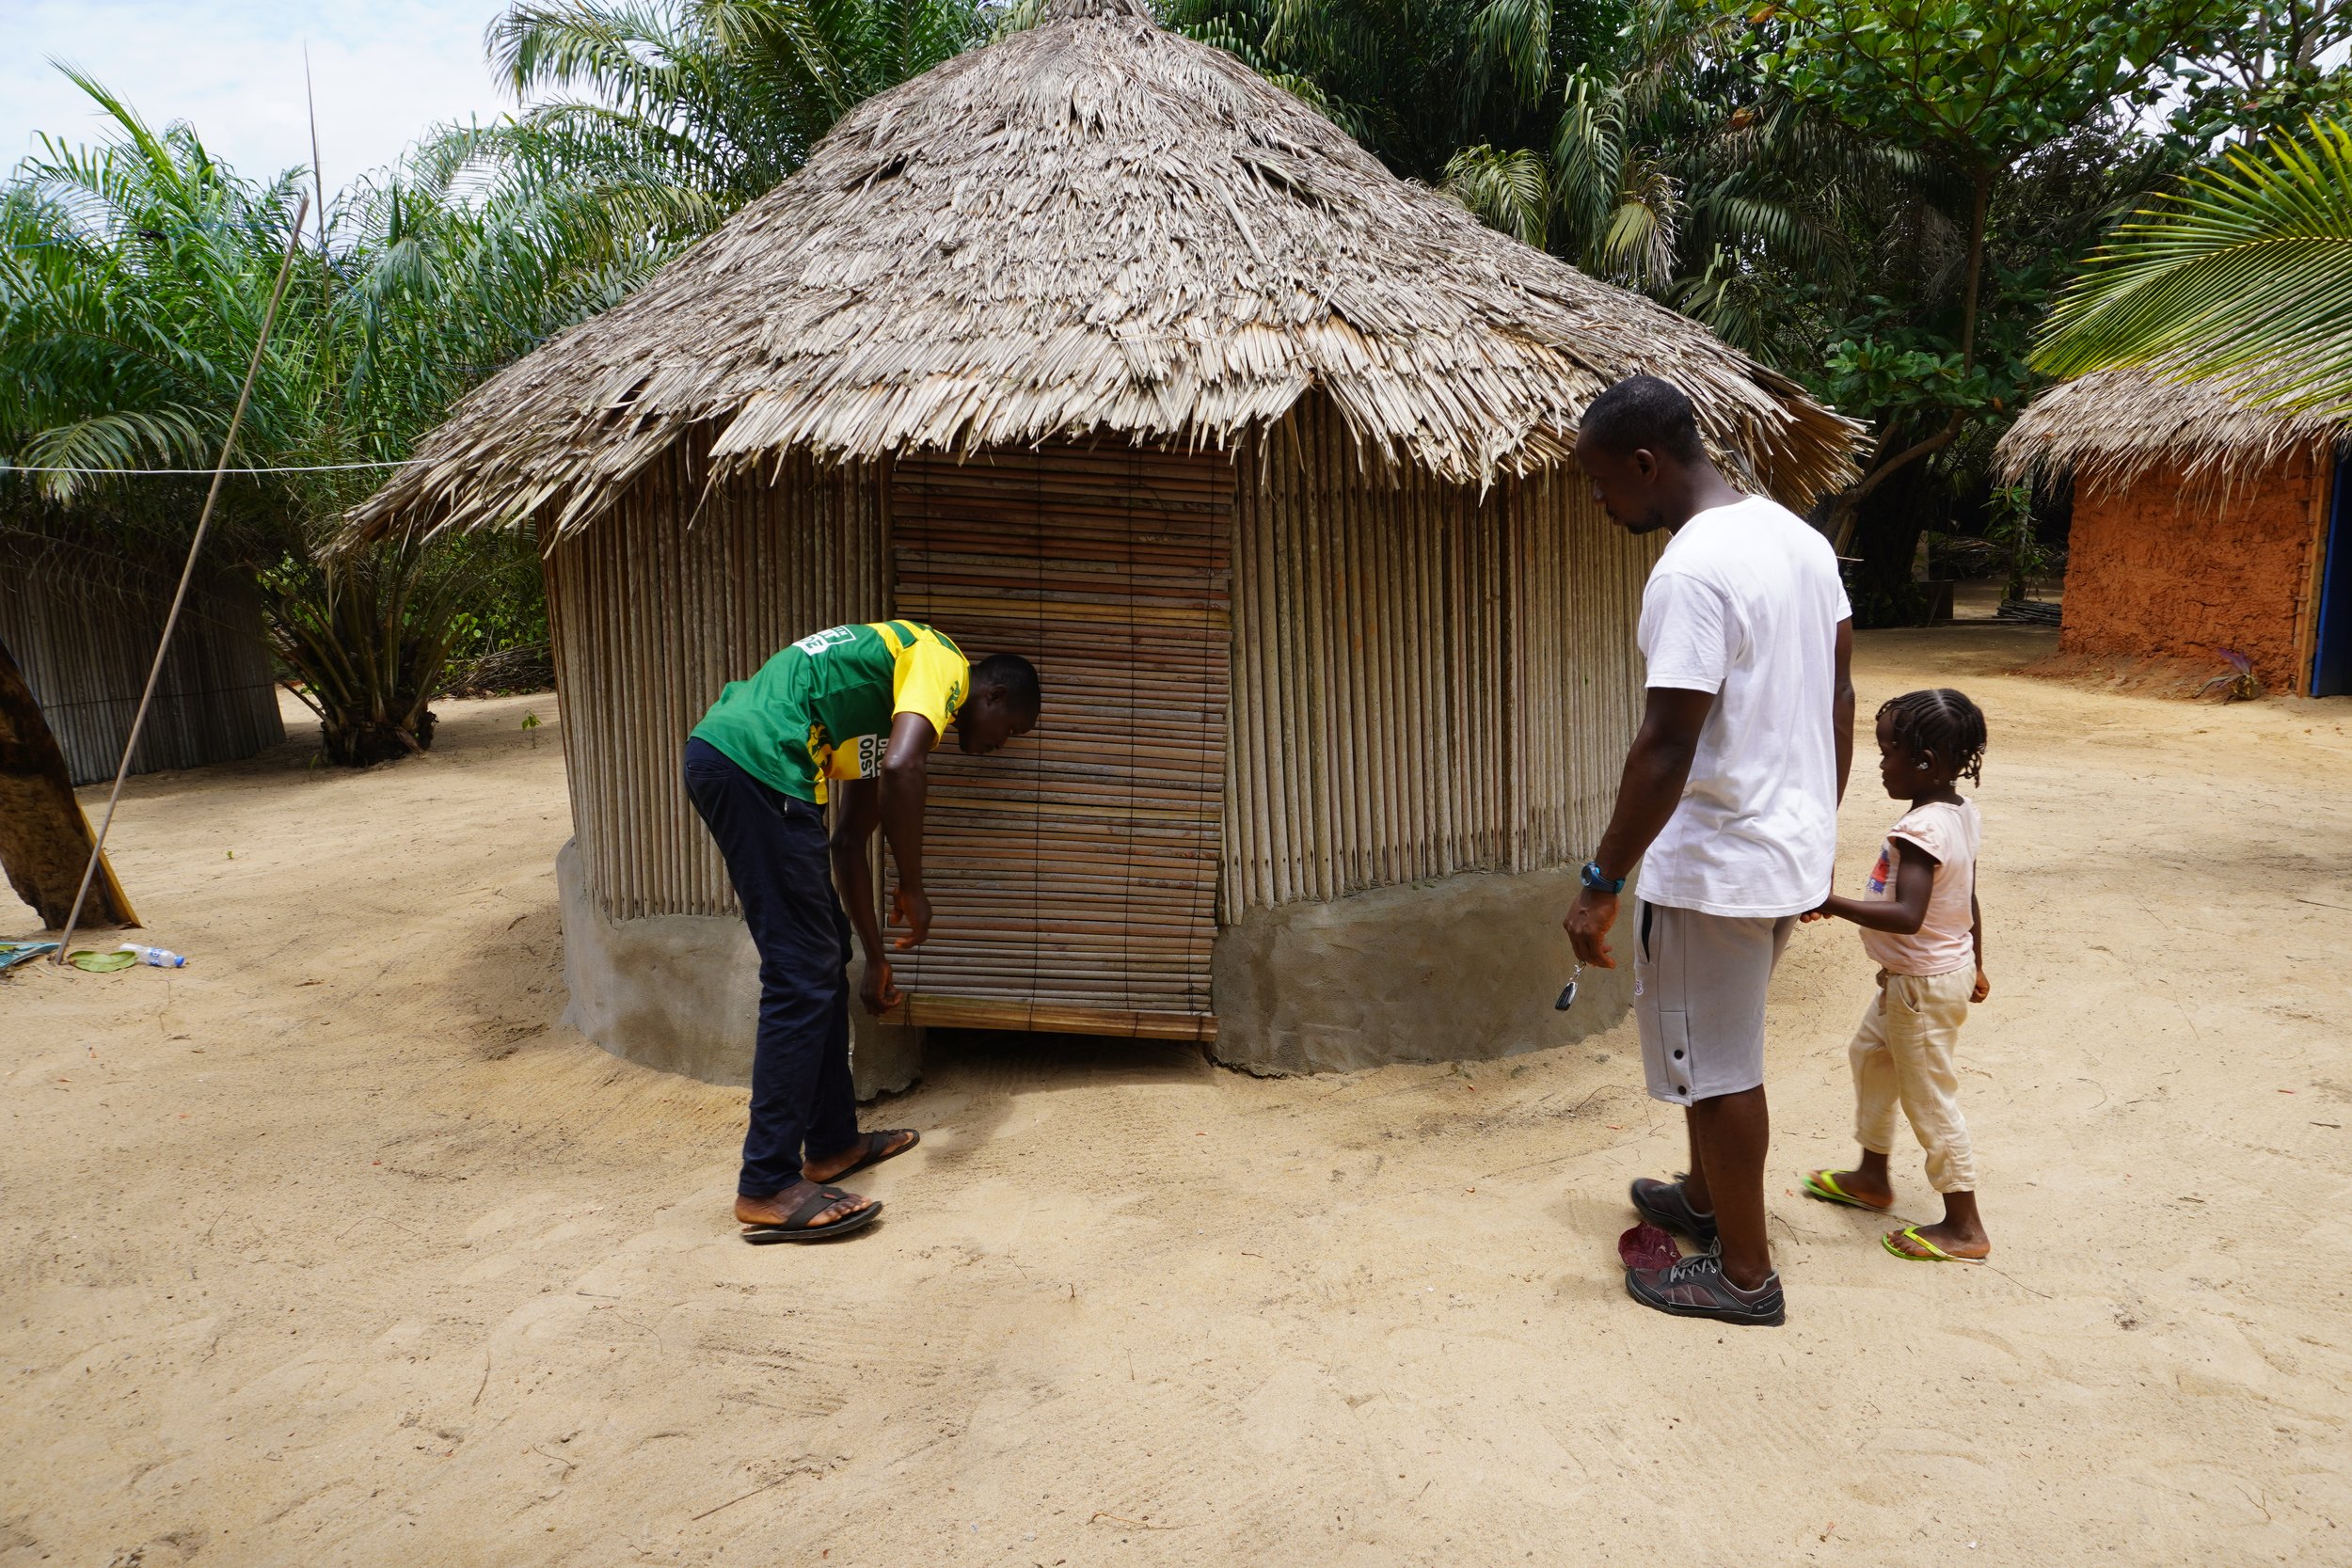  "We have formed a small team, and built cabins for the tourists. We are 100% for the turtles. This space is for those who come to see them", explains Olivier Djirobo (left), spokesman for Roc beach. Next to him, Picard Amiral and his daughter Grâce,